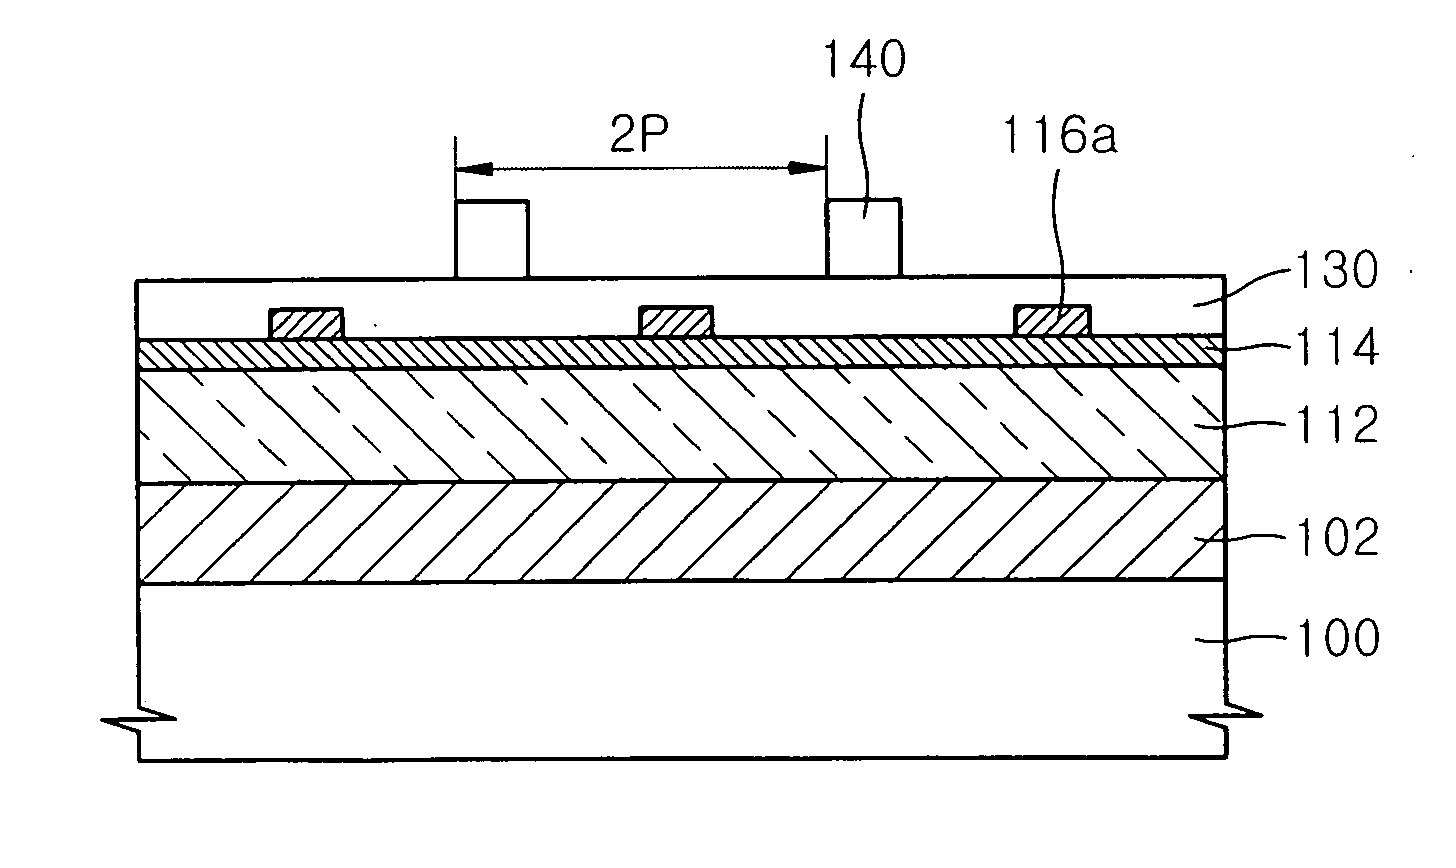 Methods of fabricating a semiconductor device